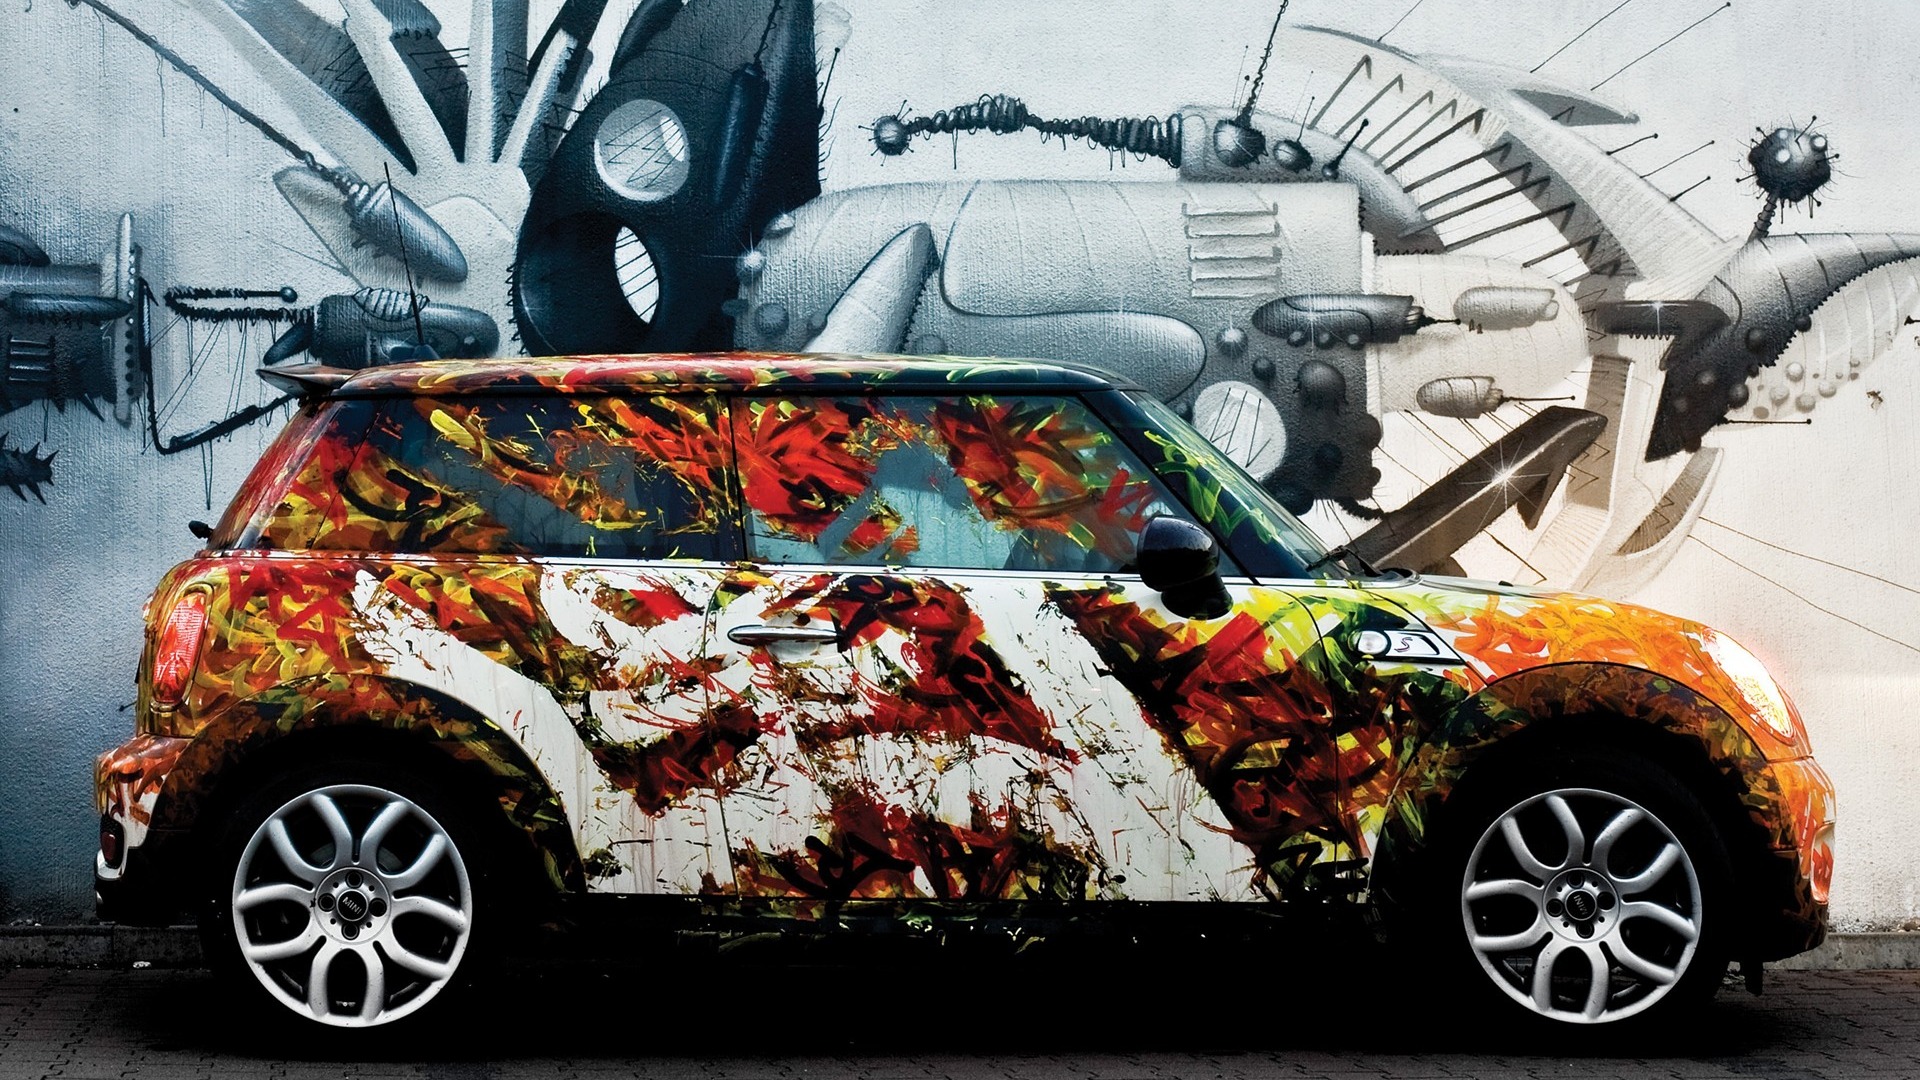 Personalized painted car wallpaper #9 - 1920x1080